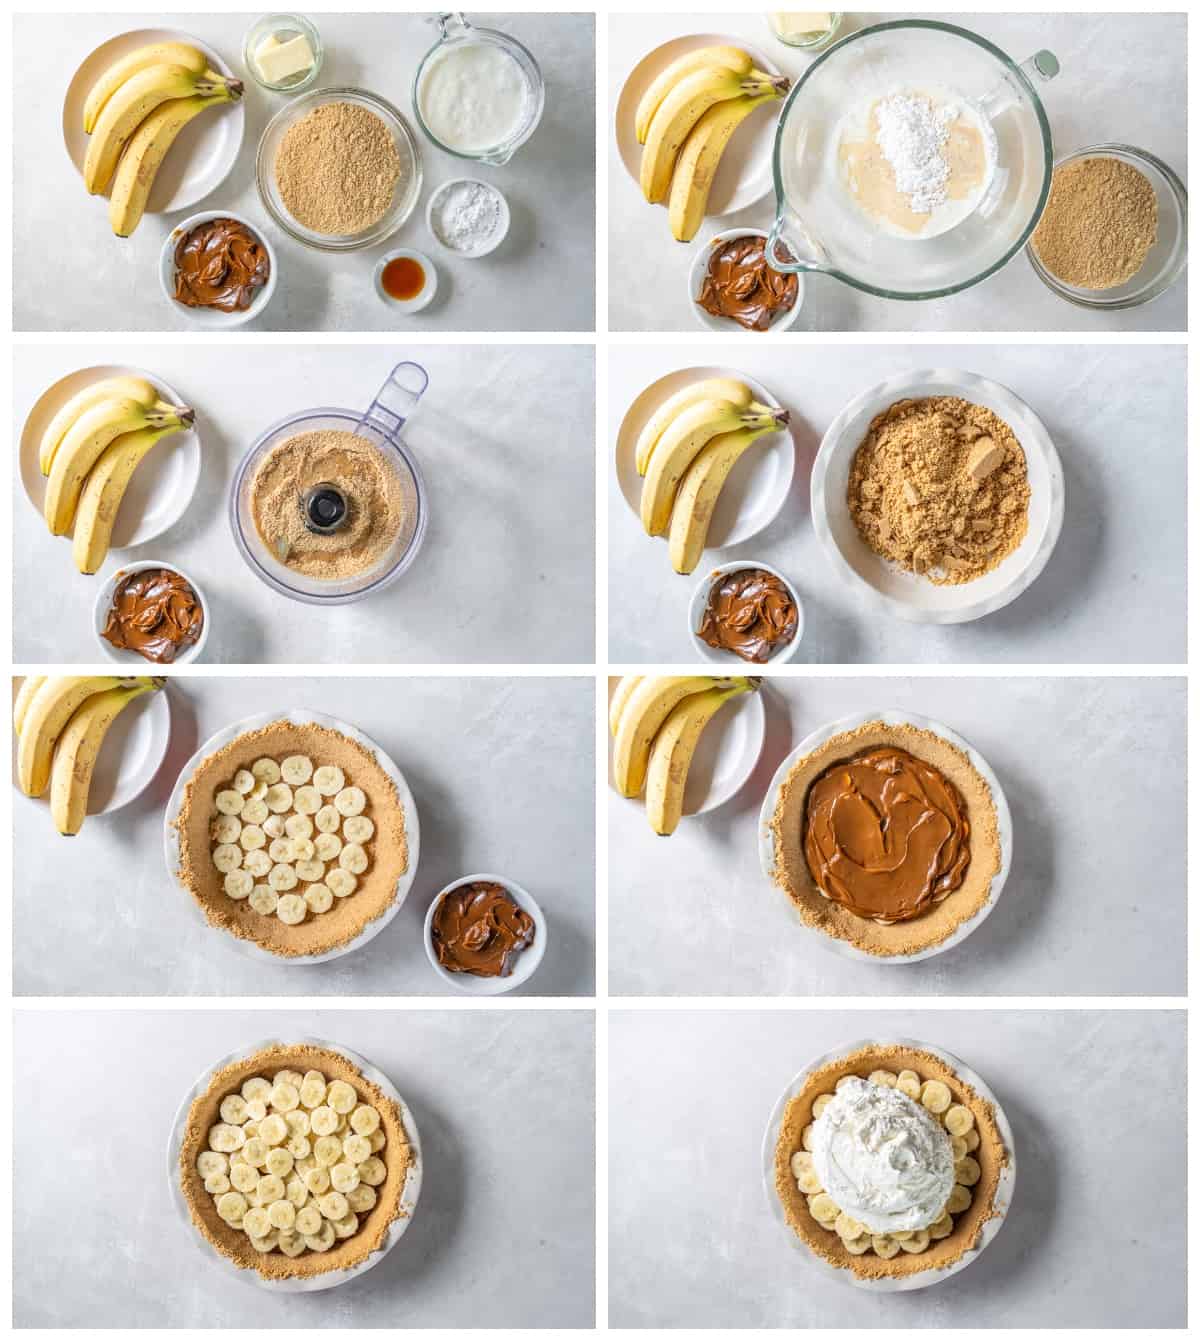 how to make banoffee pie step by step photo instructions